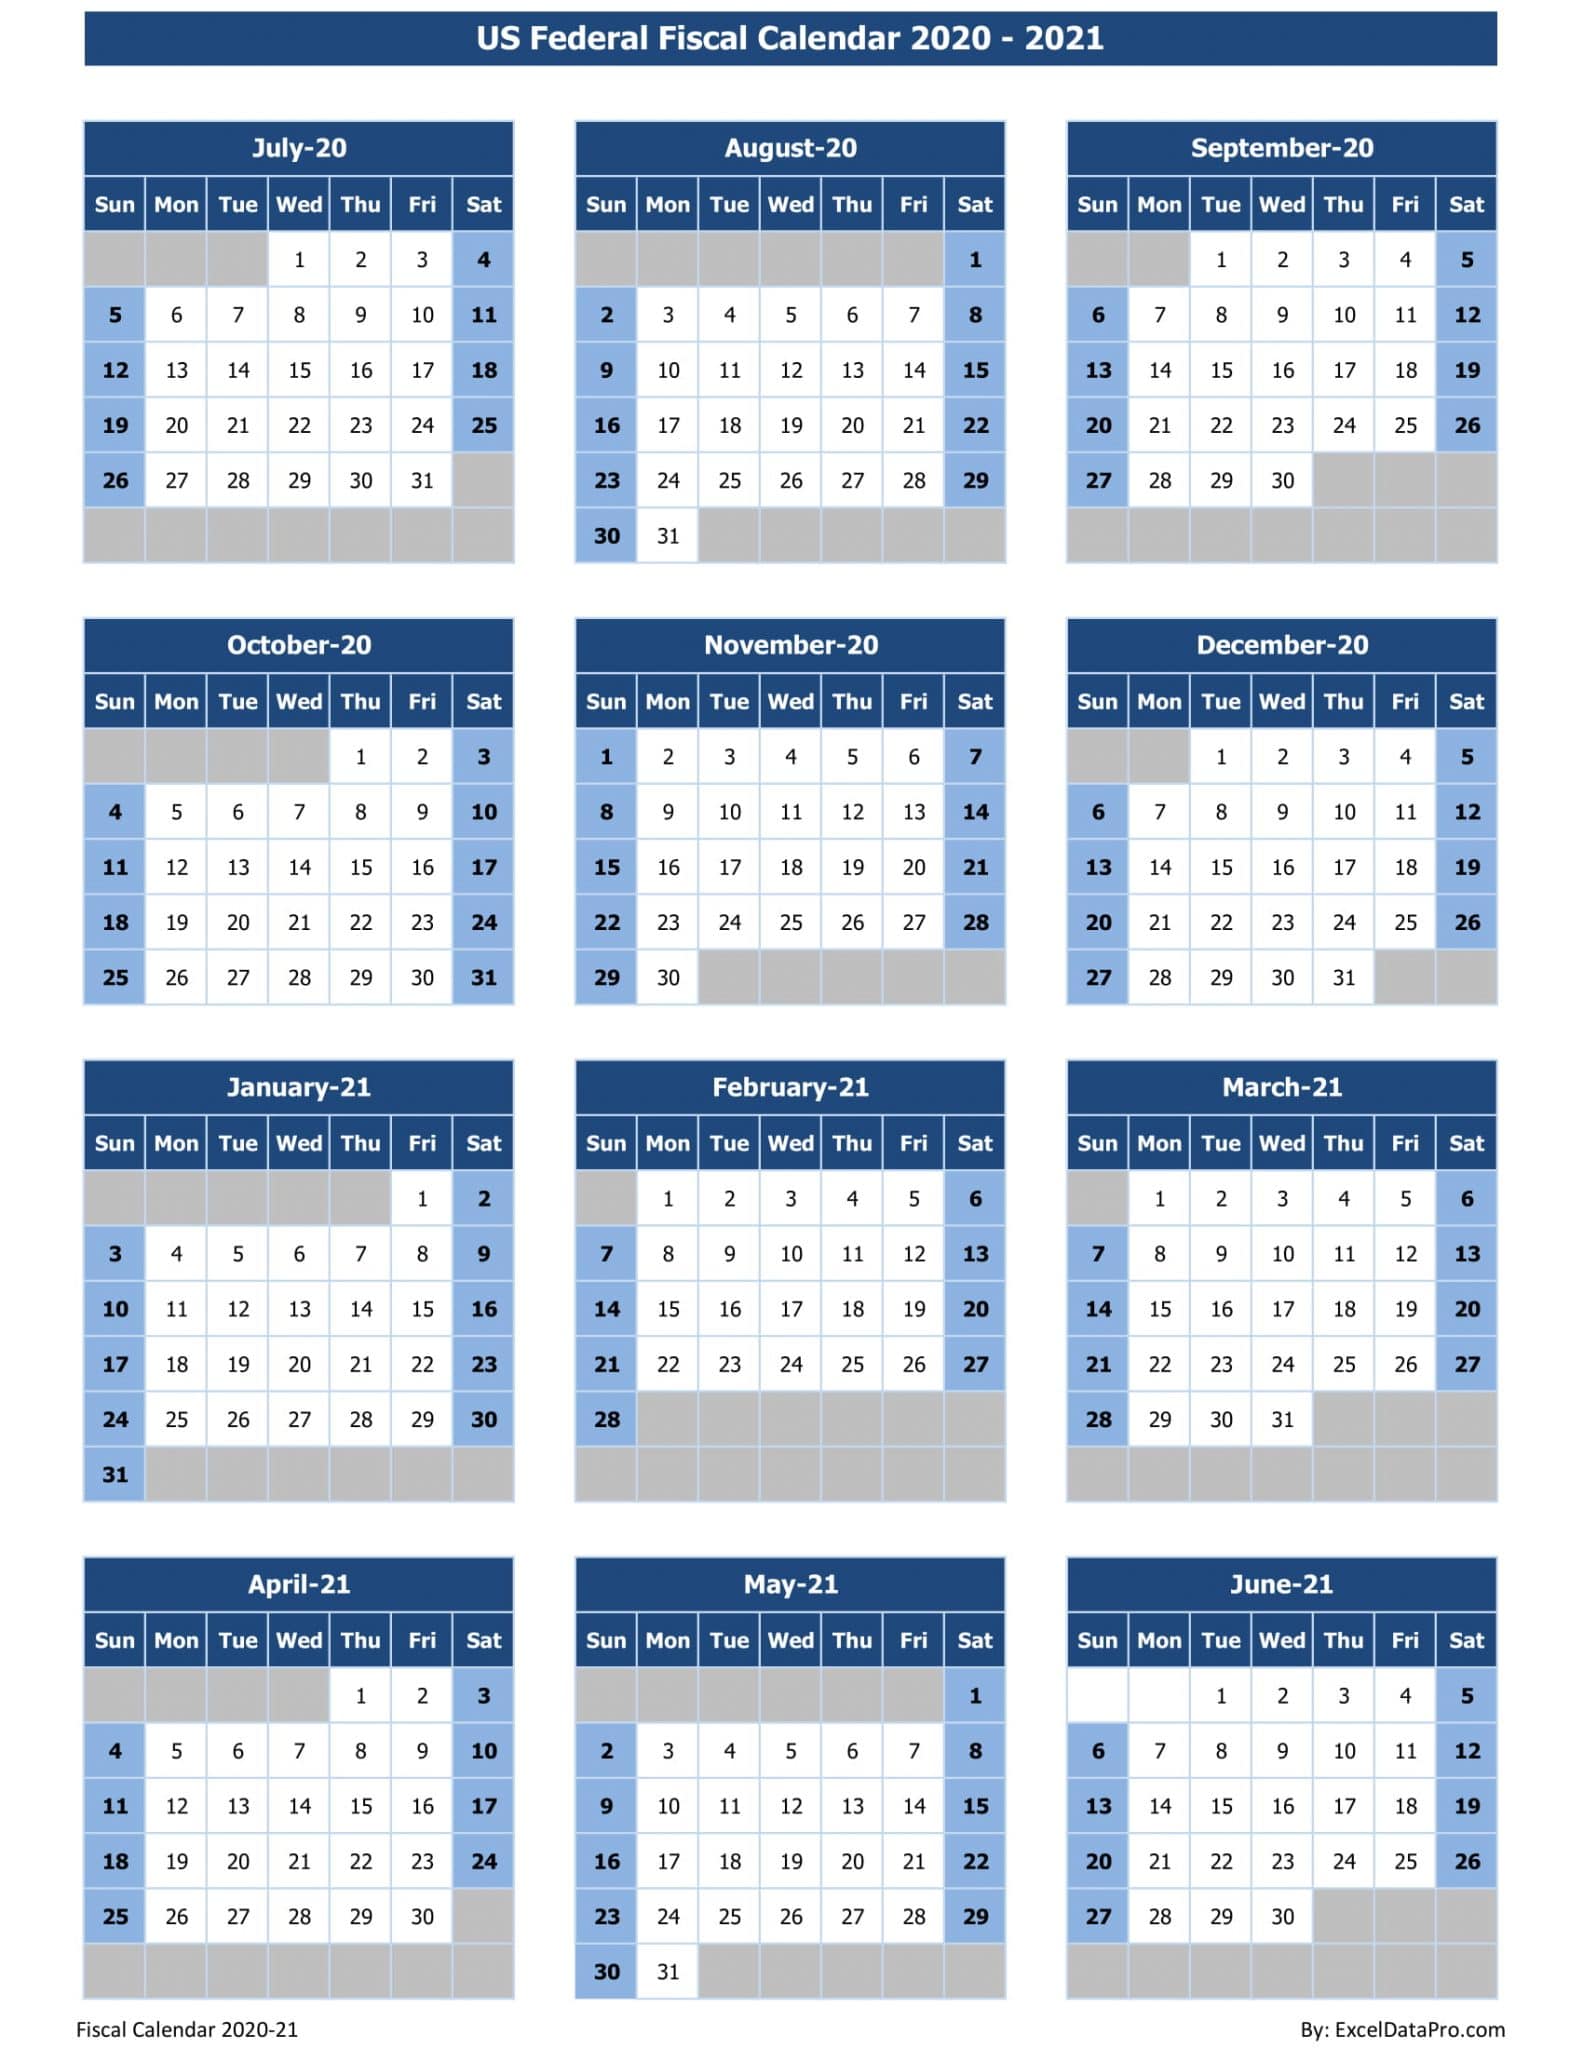 download-us-federal-fiscal-calendar-2020-21-excel-template-exceldatapro